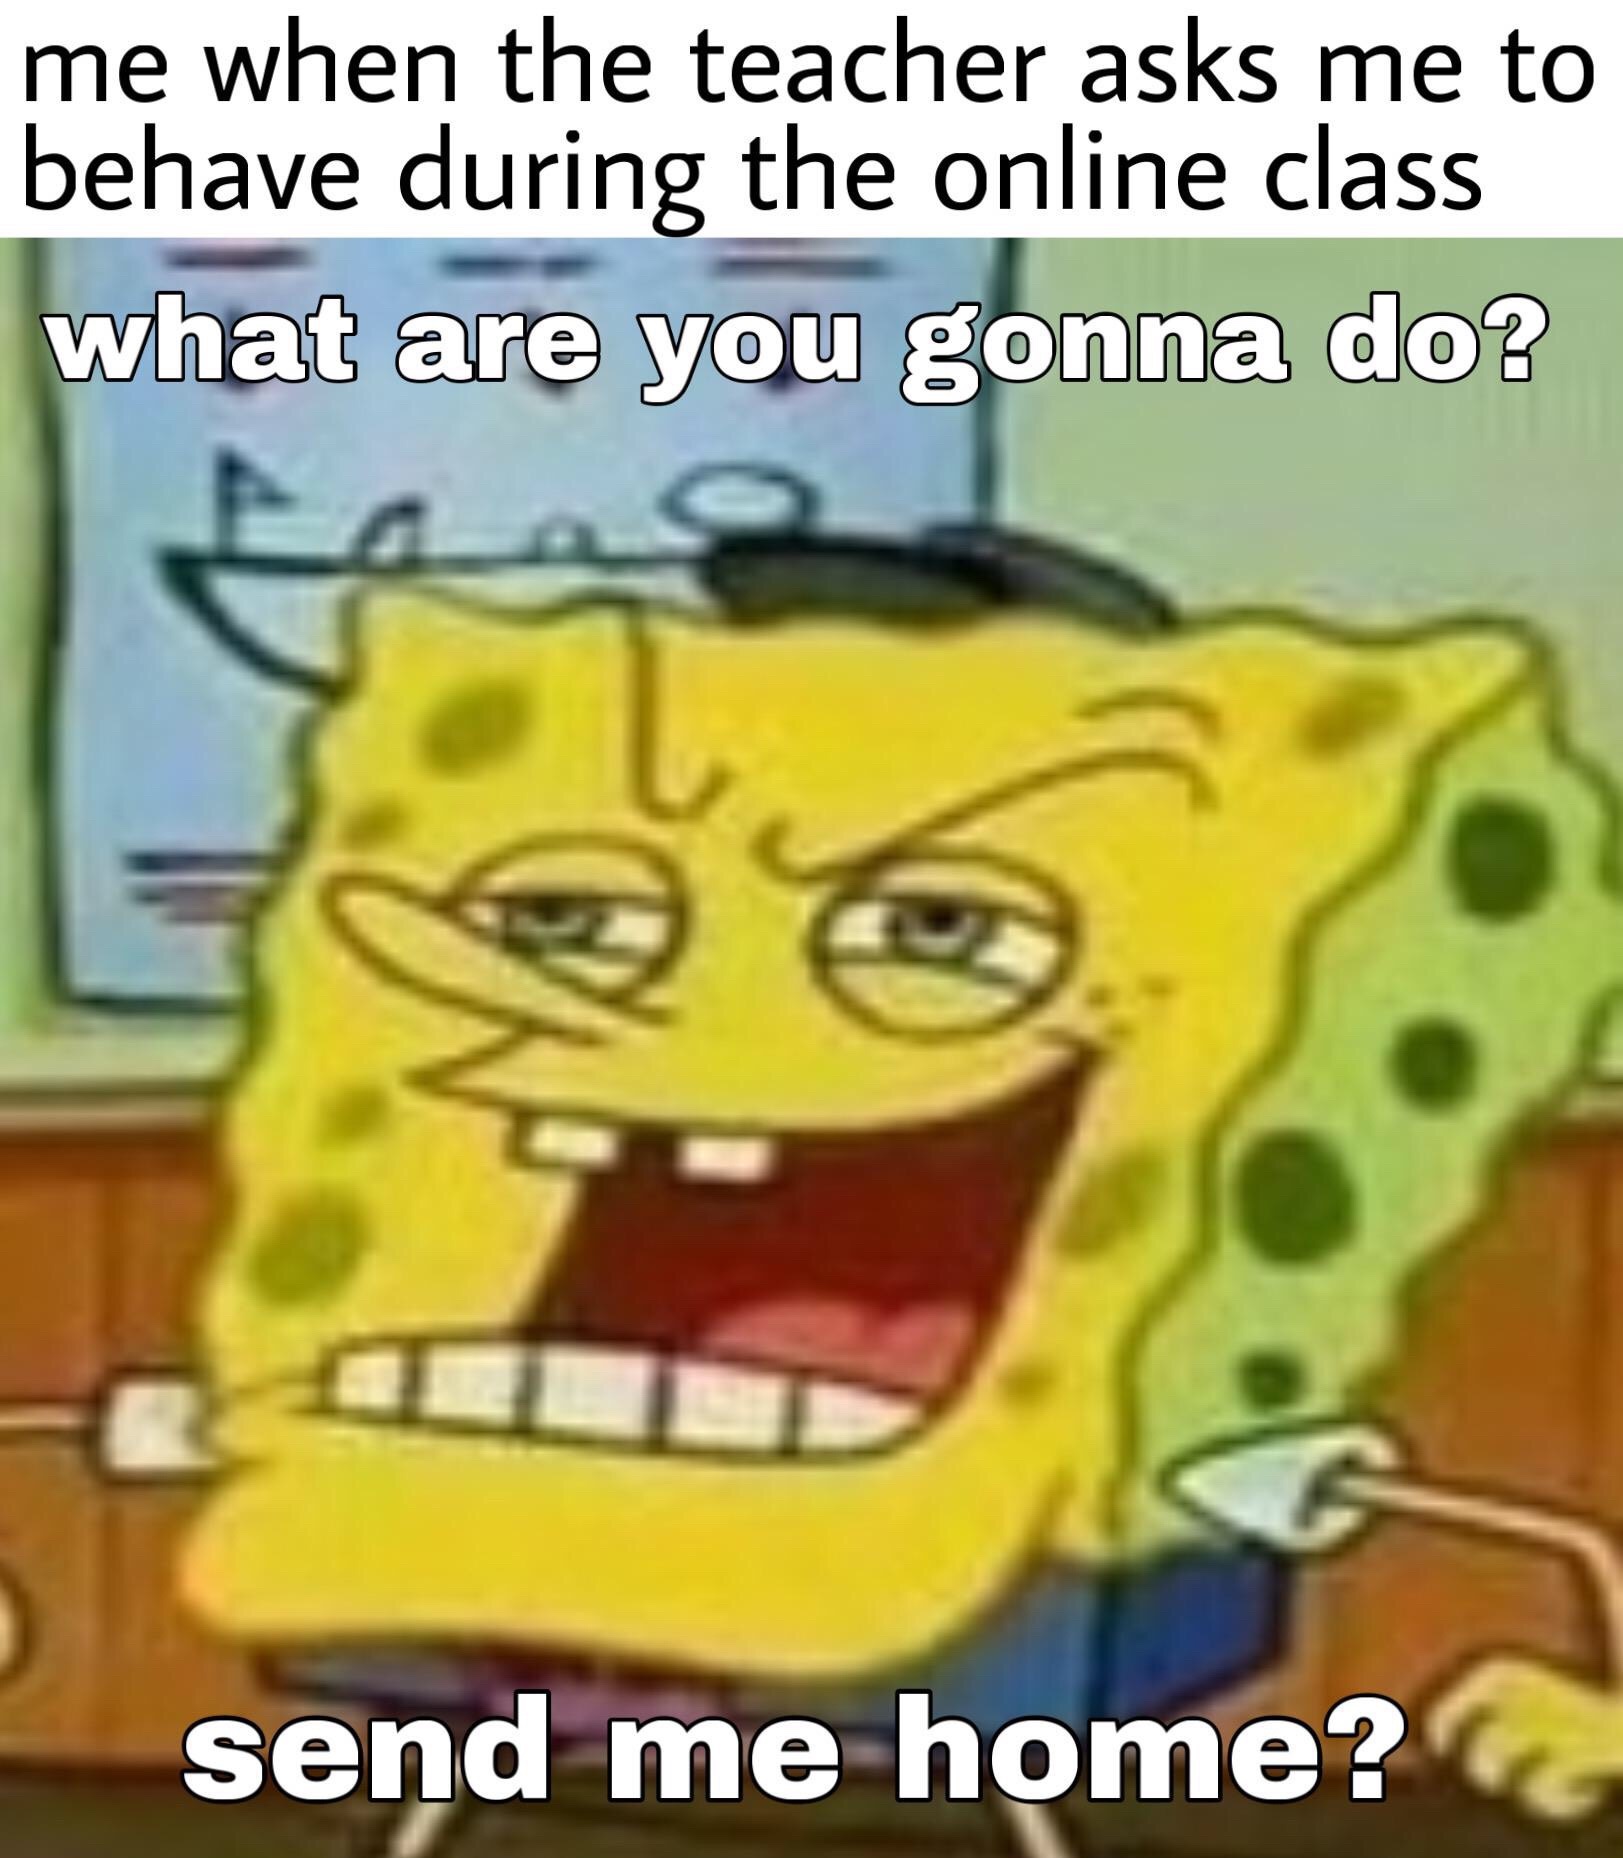 spongebob cursed - me when the teacher asks me to behave during the online class what are you gonna do? send me home?